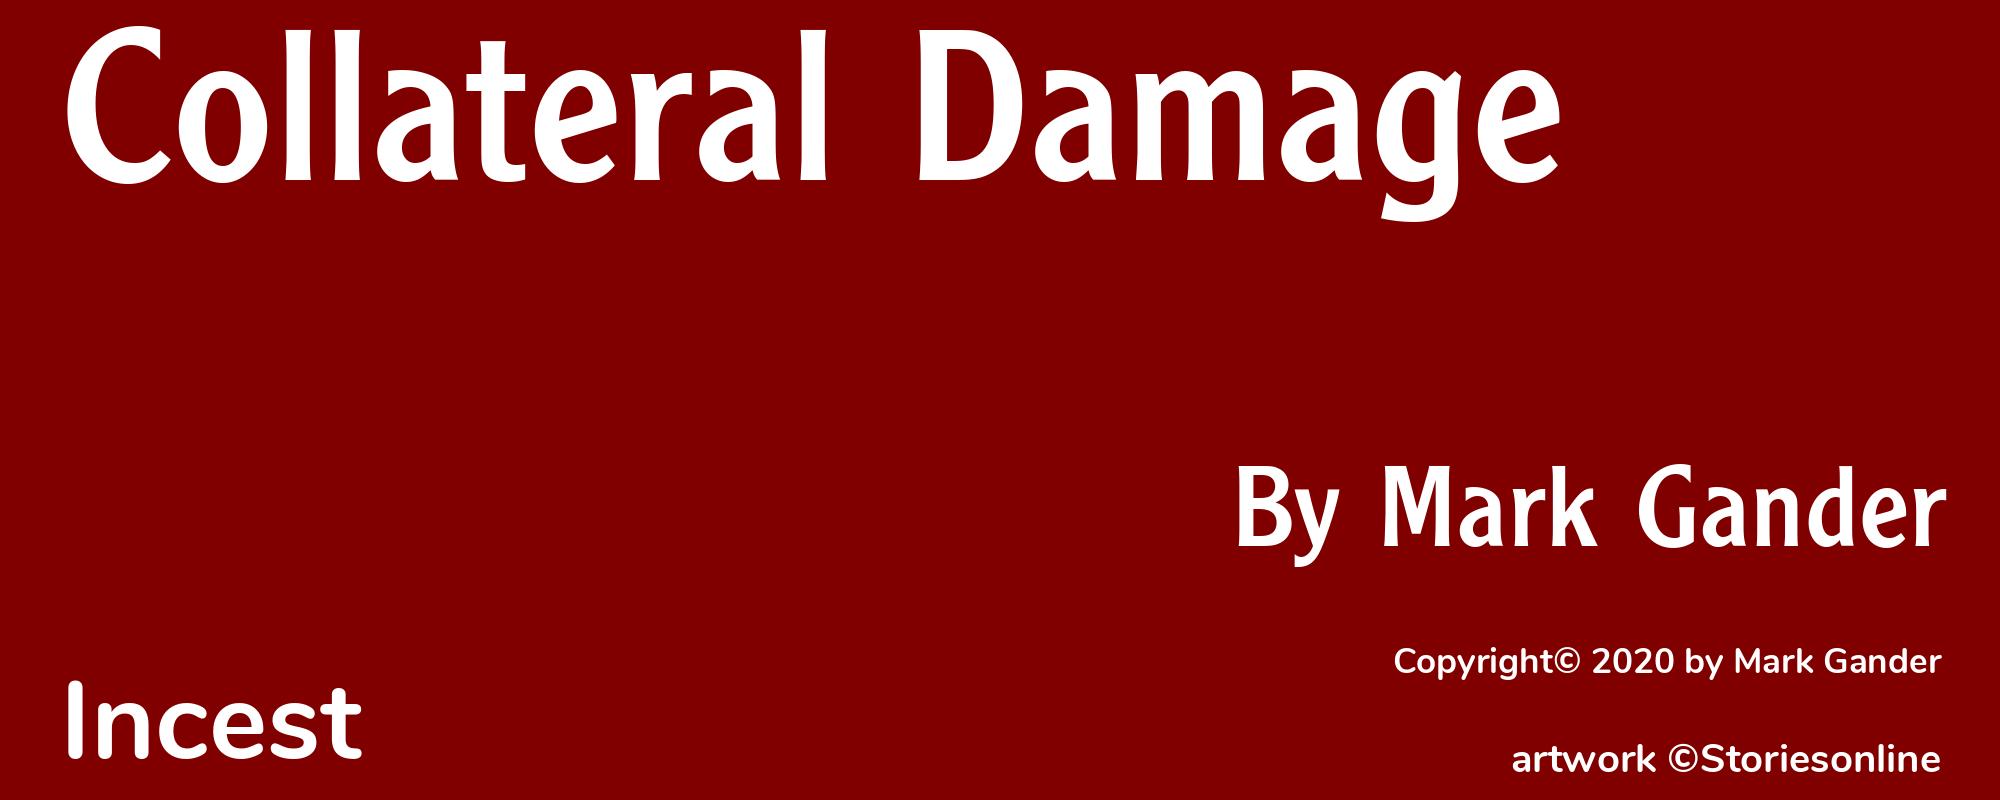 Collateral Damage - Cover